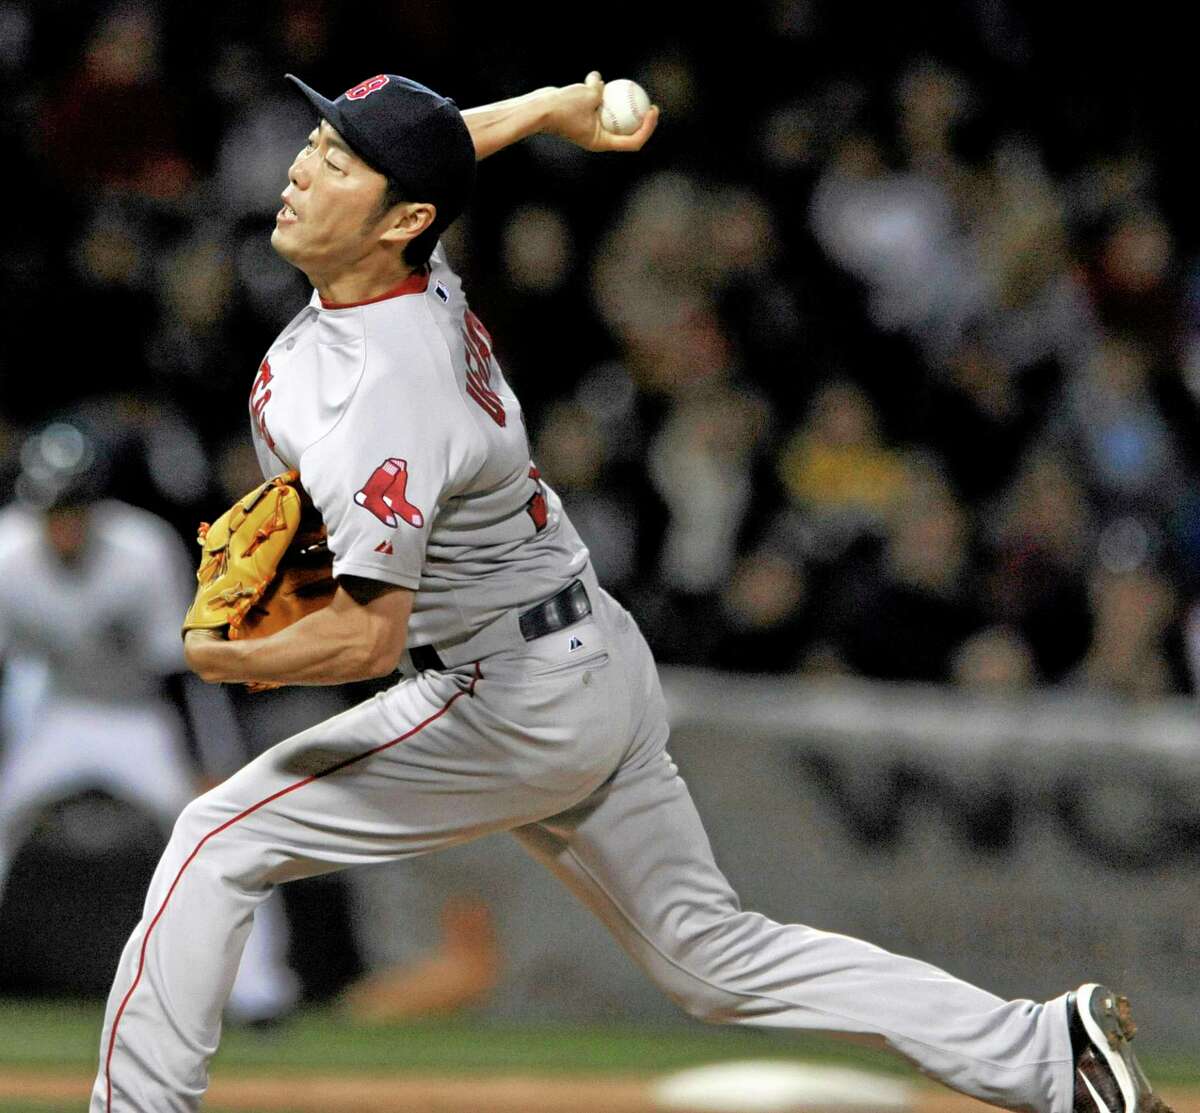 Boston Red Sox closer Koji Uehara delivers a pitch in a 3-1 win over the White Sox.